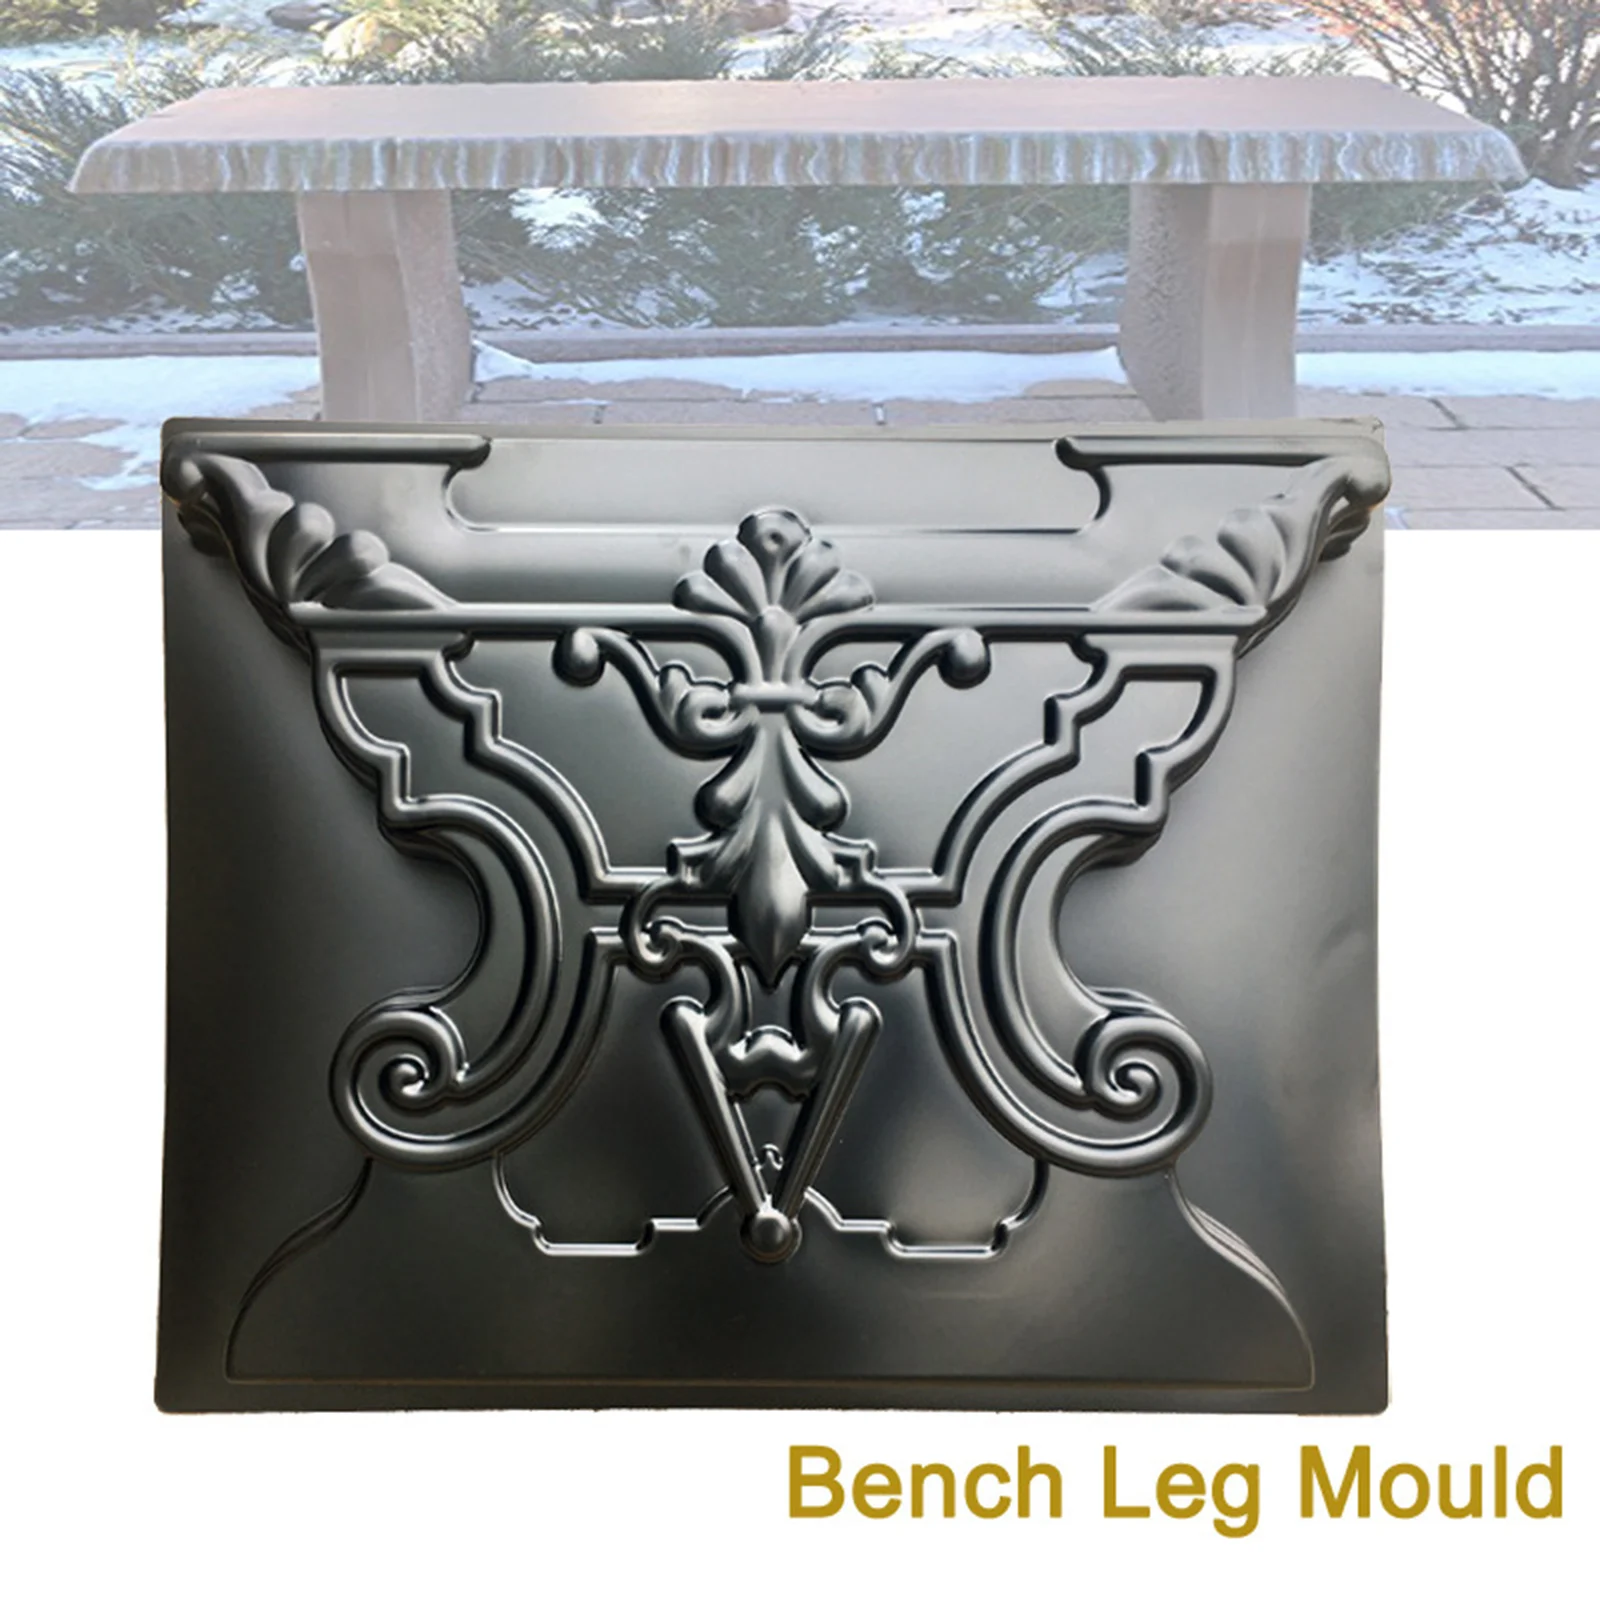 Simulation Bench Leg Mold Paving Mould for Outdoor Lawn Driveway Decor